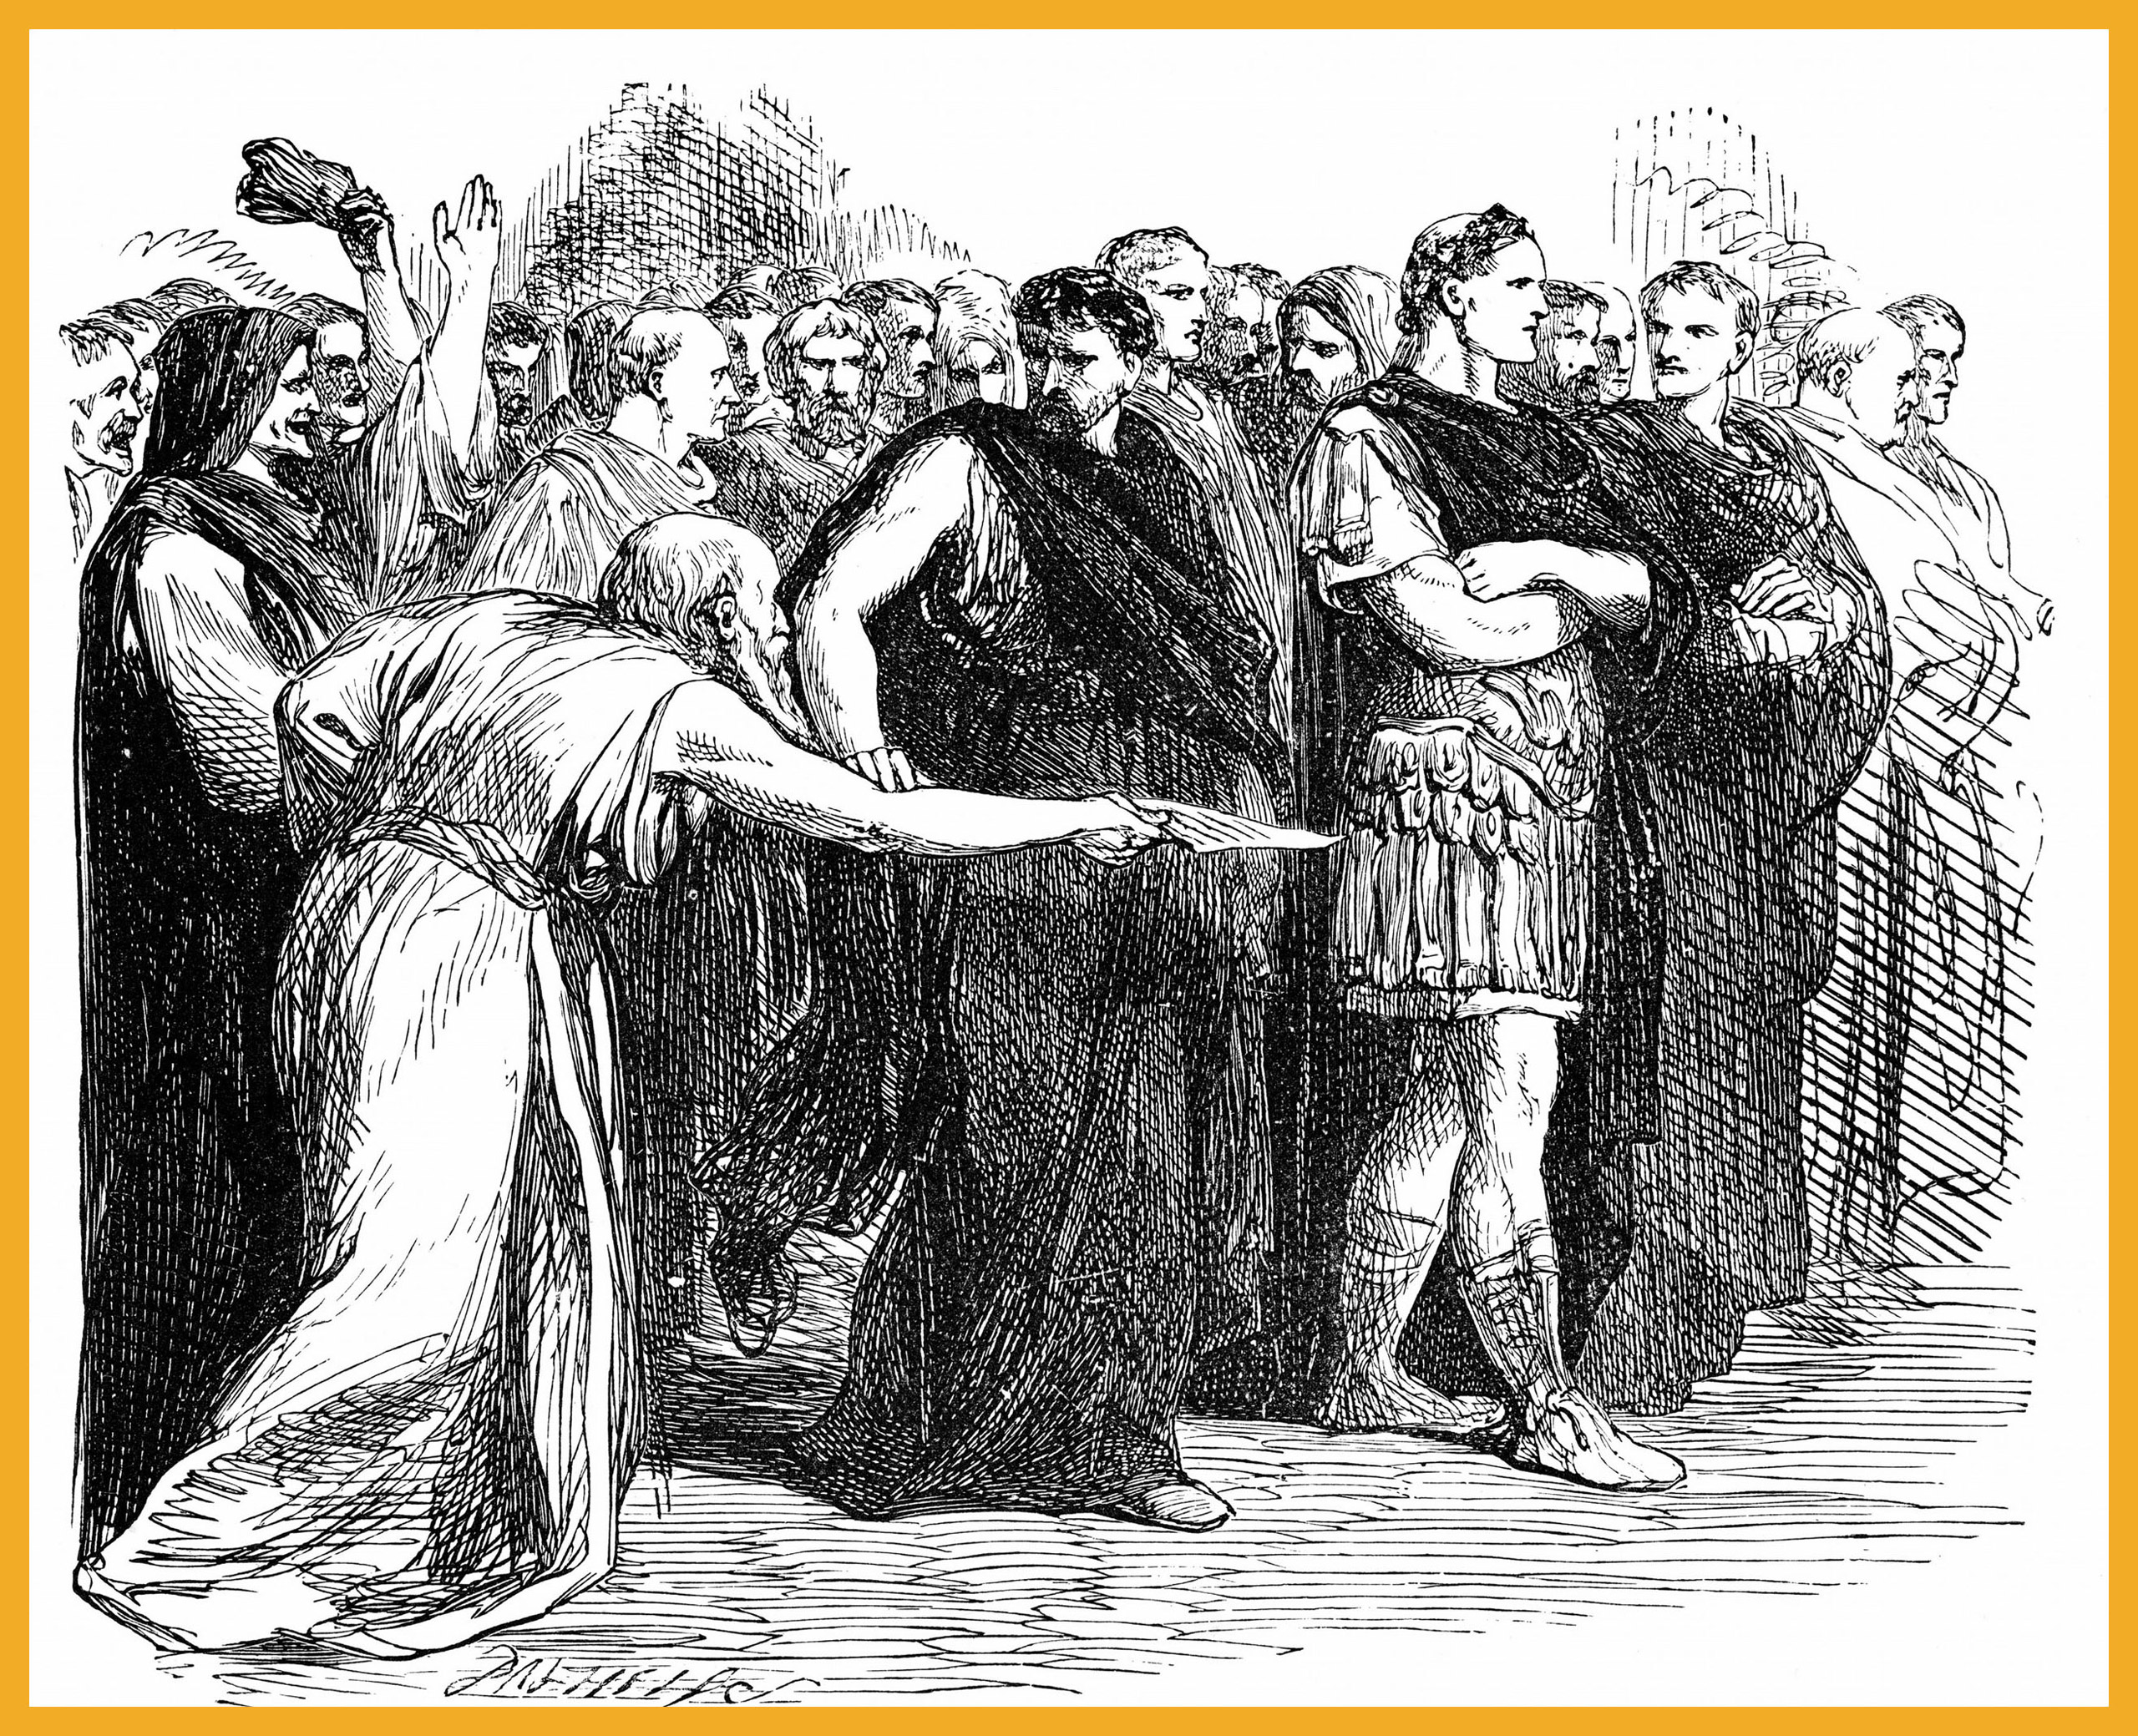 Beware the Ides of March: Soothsayer warning Julius Caesar of the Ides of March - the day on which he was assassinated. Illustration for Julius Caesar from an edition of William Shakespeare's works published 1858. (Universal History Archive—Getty Images)